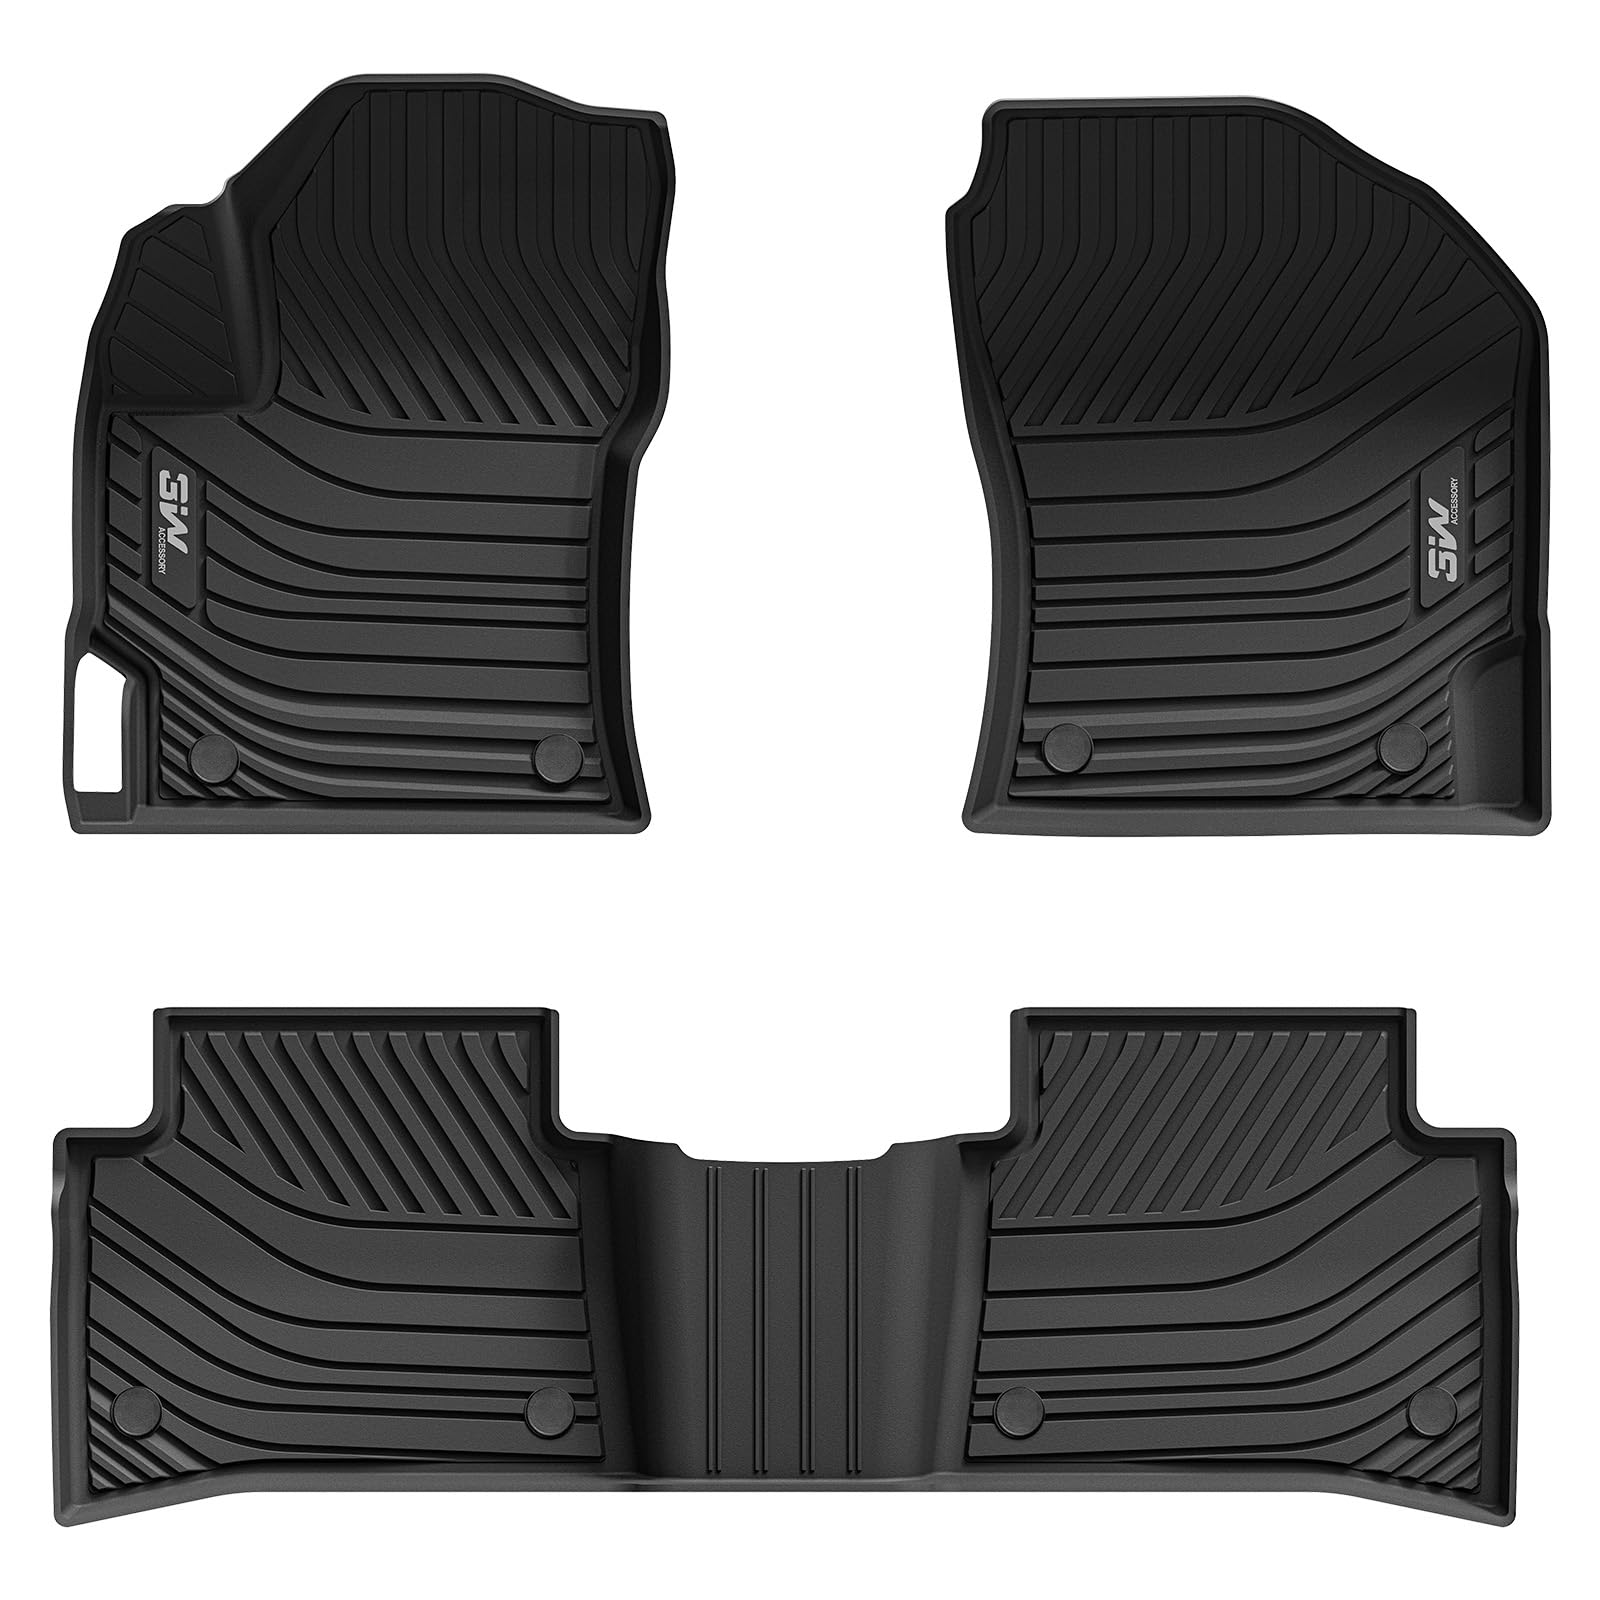 3W Toyota Corolla Sedan (Not for Cross or Hatchback) 2020-2024 Custom Floor Mats TPE Material & All-Weather Protection Vehicles & Parts 3Wliners 2020-2024 Corolla 2020-2024 1st&2nd Row Mats